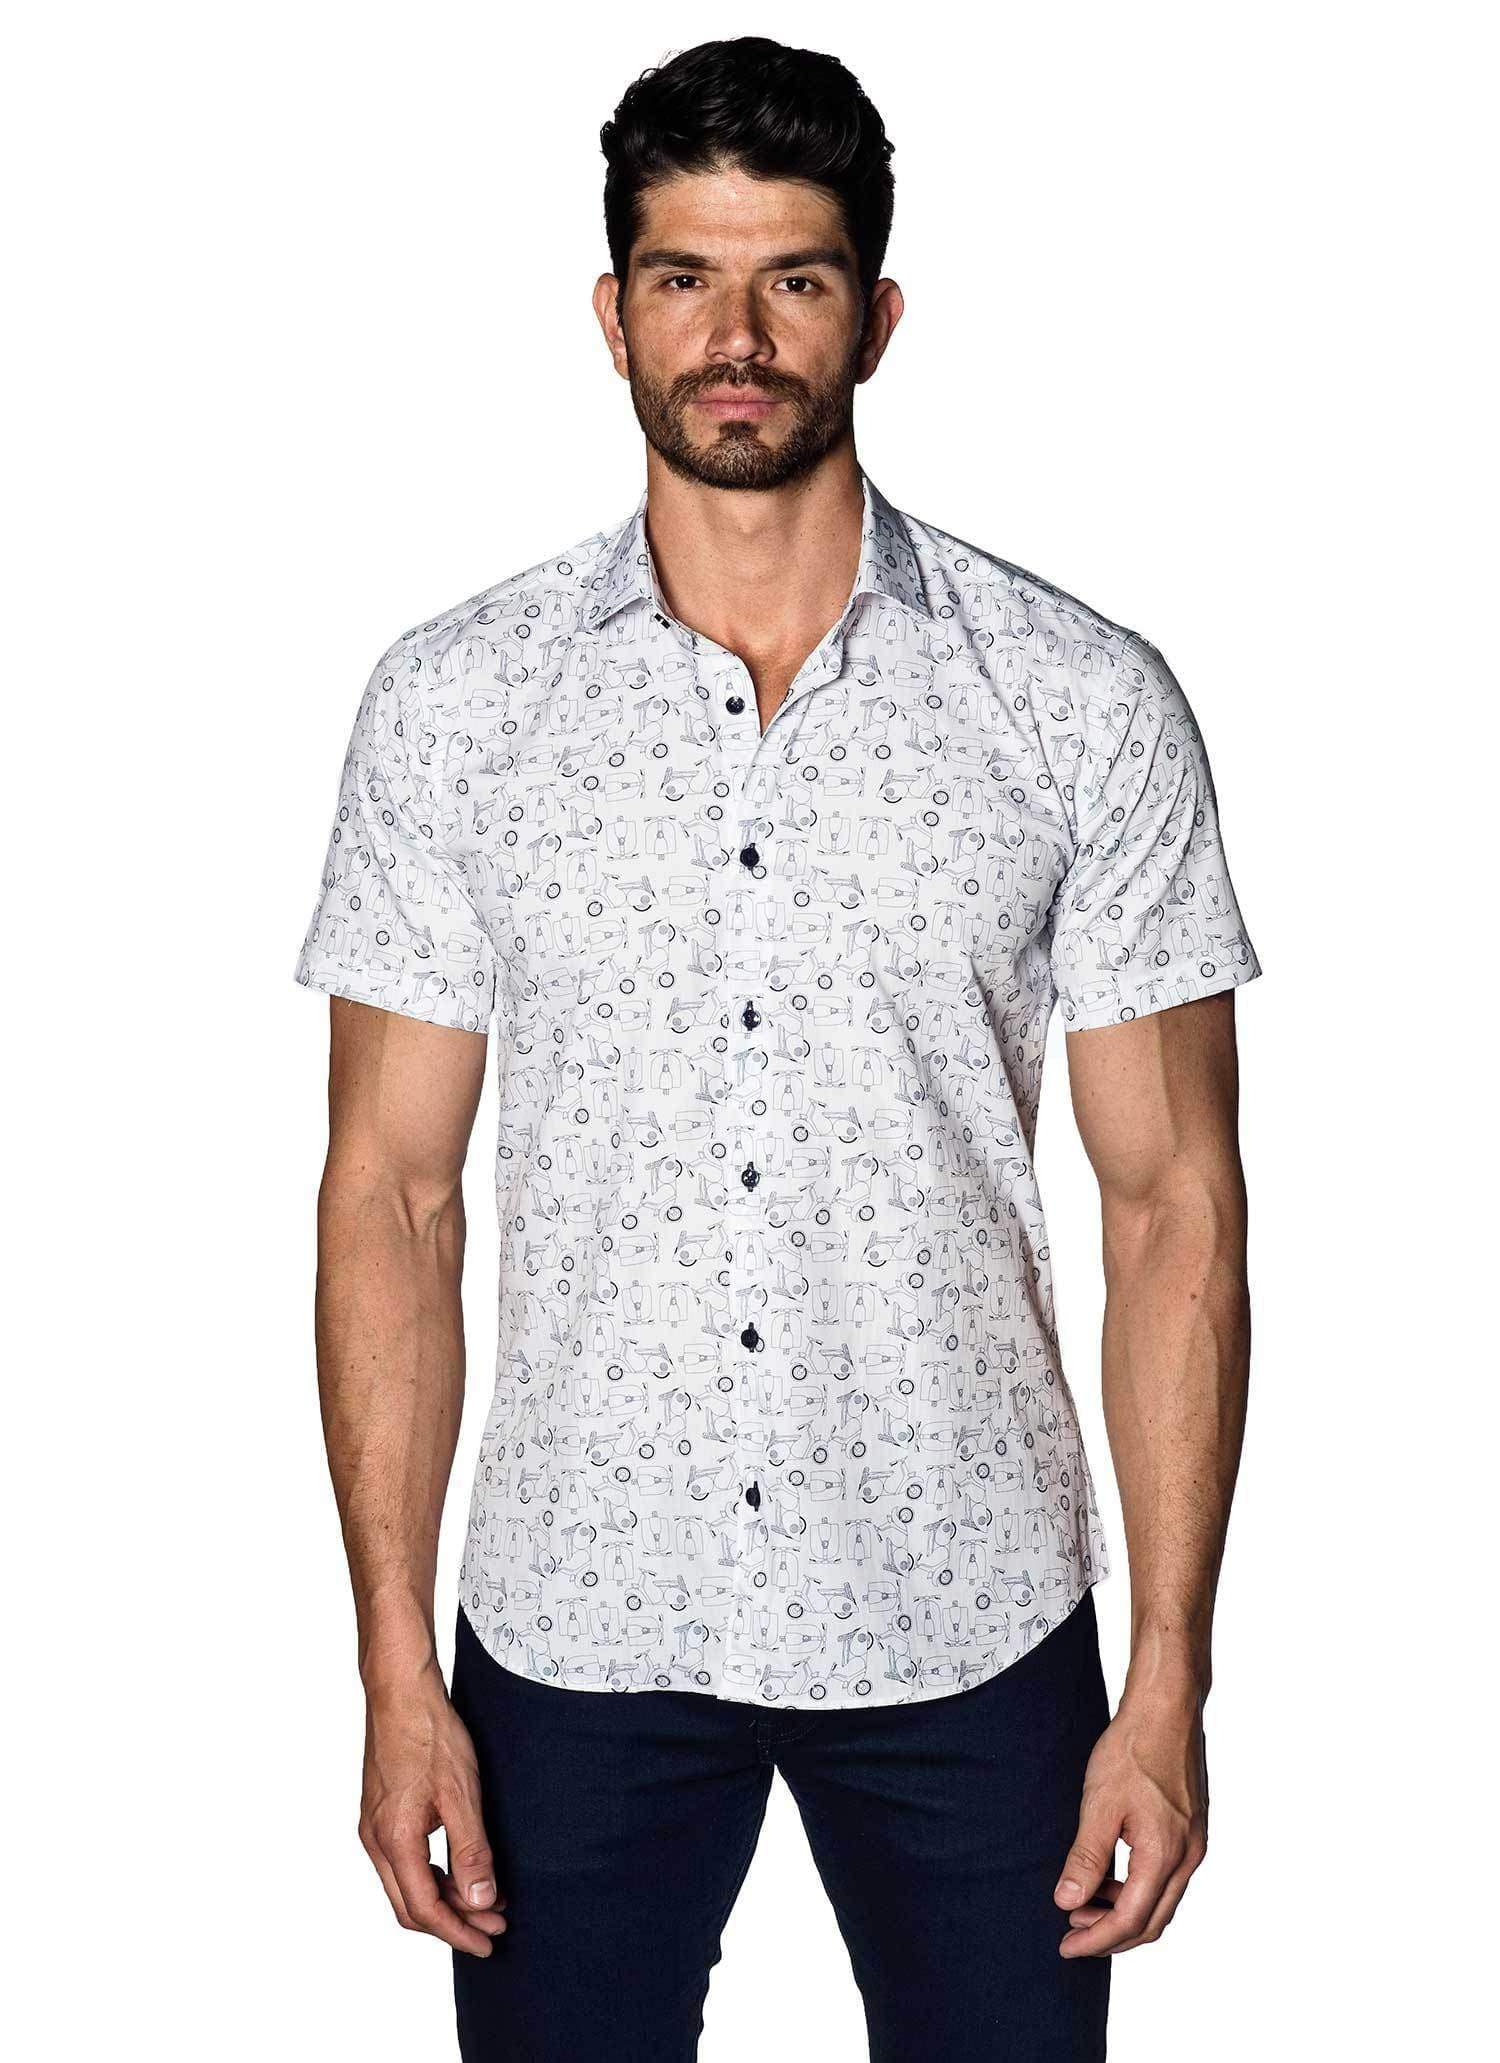 White with Scooter Pattern Short Sleeve Shirt for Men T-592-SS - Front - Jared Lang